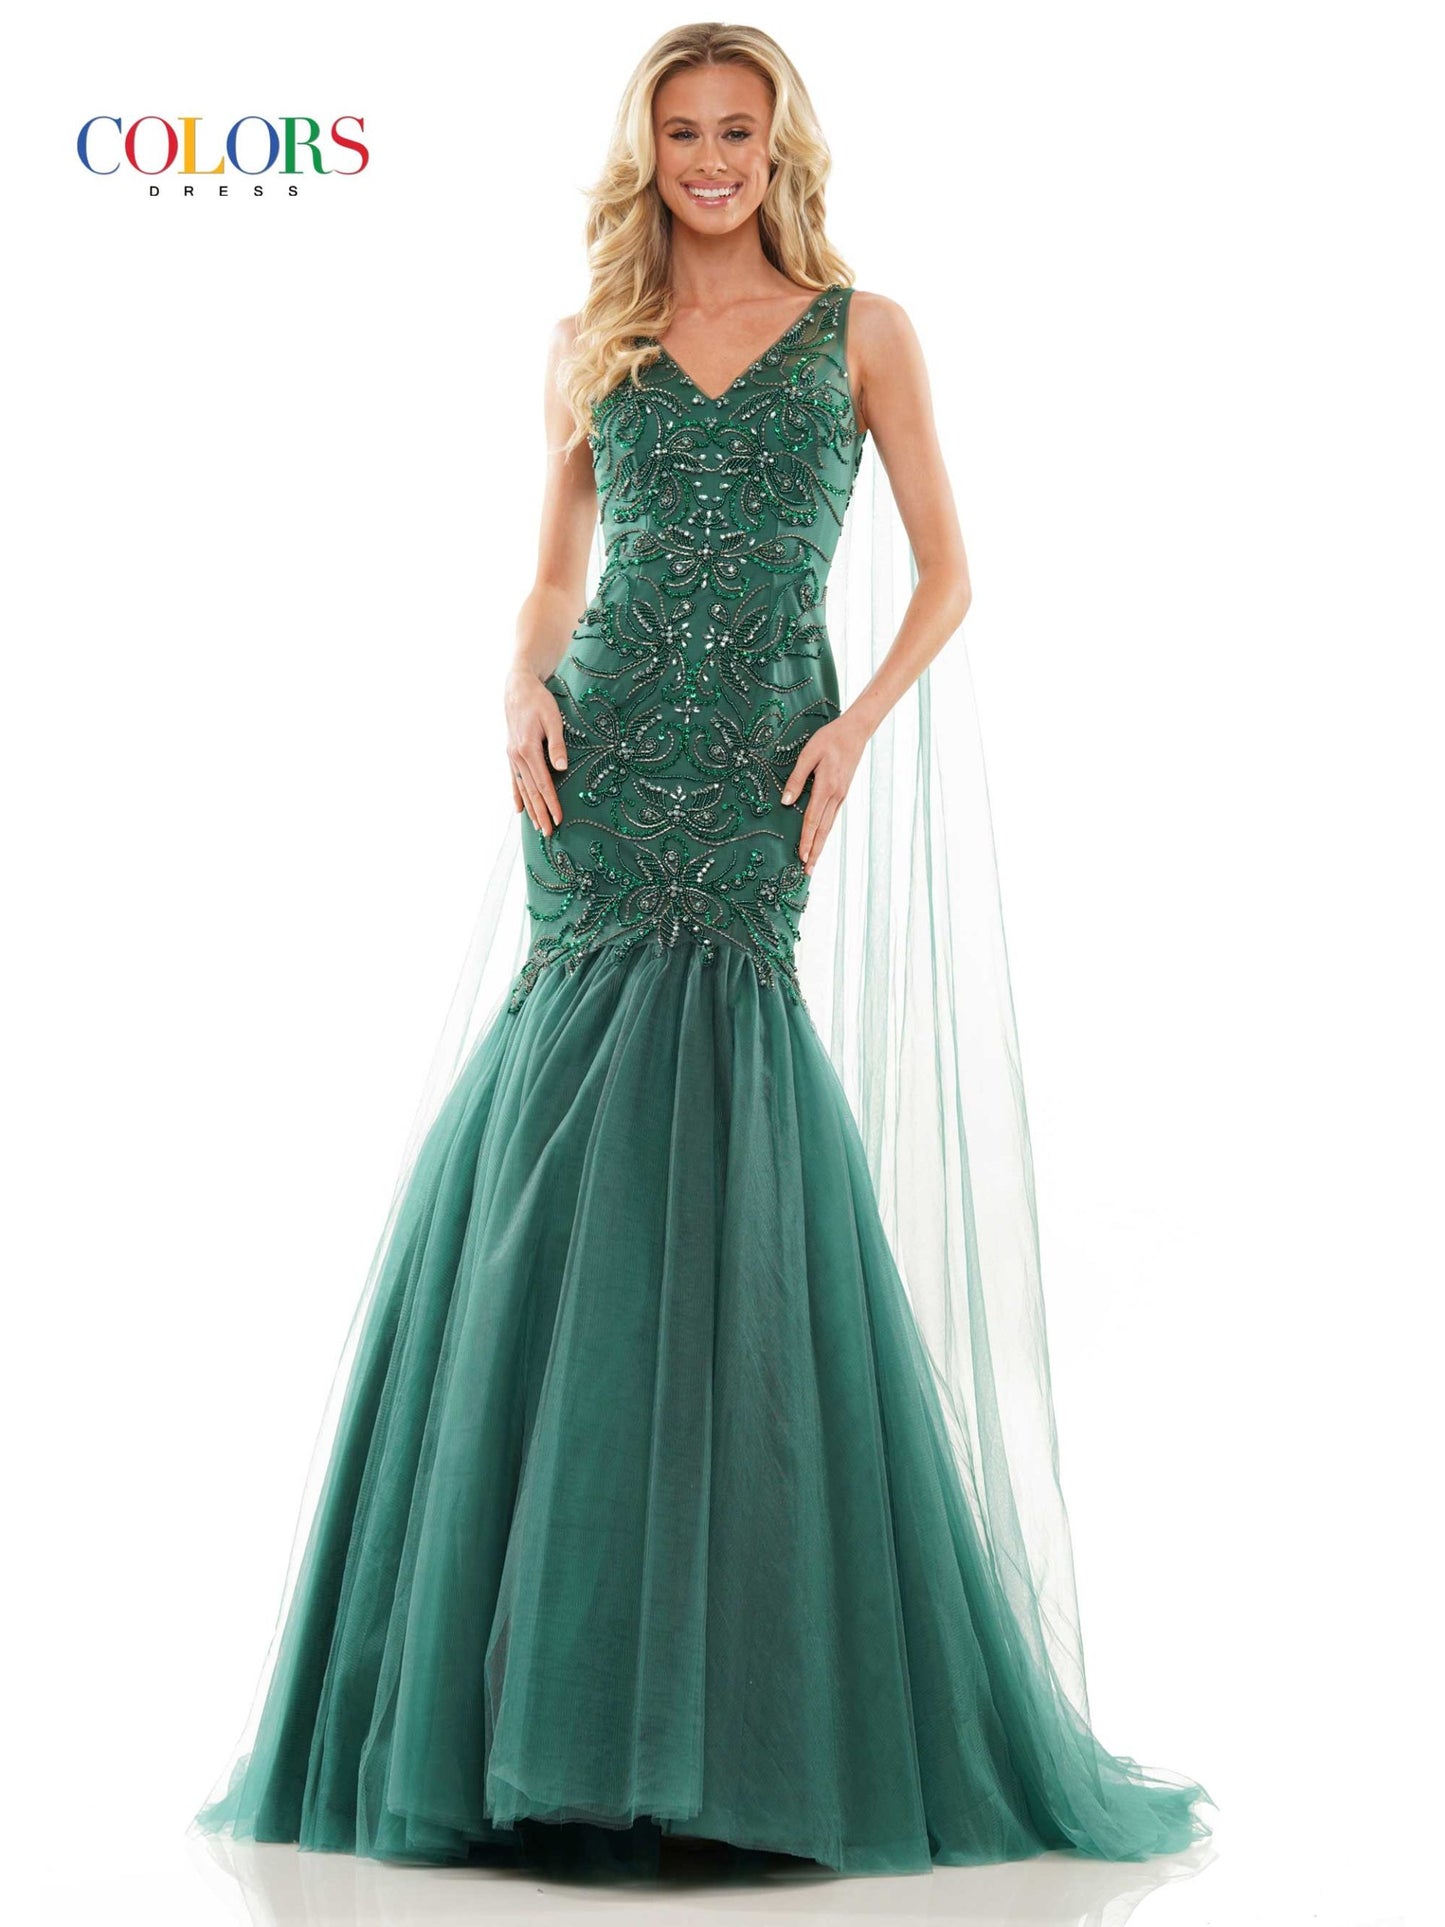 Colors Dress 2993 Mermaid Prom Dress with Capes 47"beaded mesh mermaid dress with V-neck, lace-up on back,  deep green